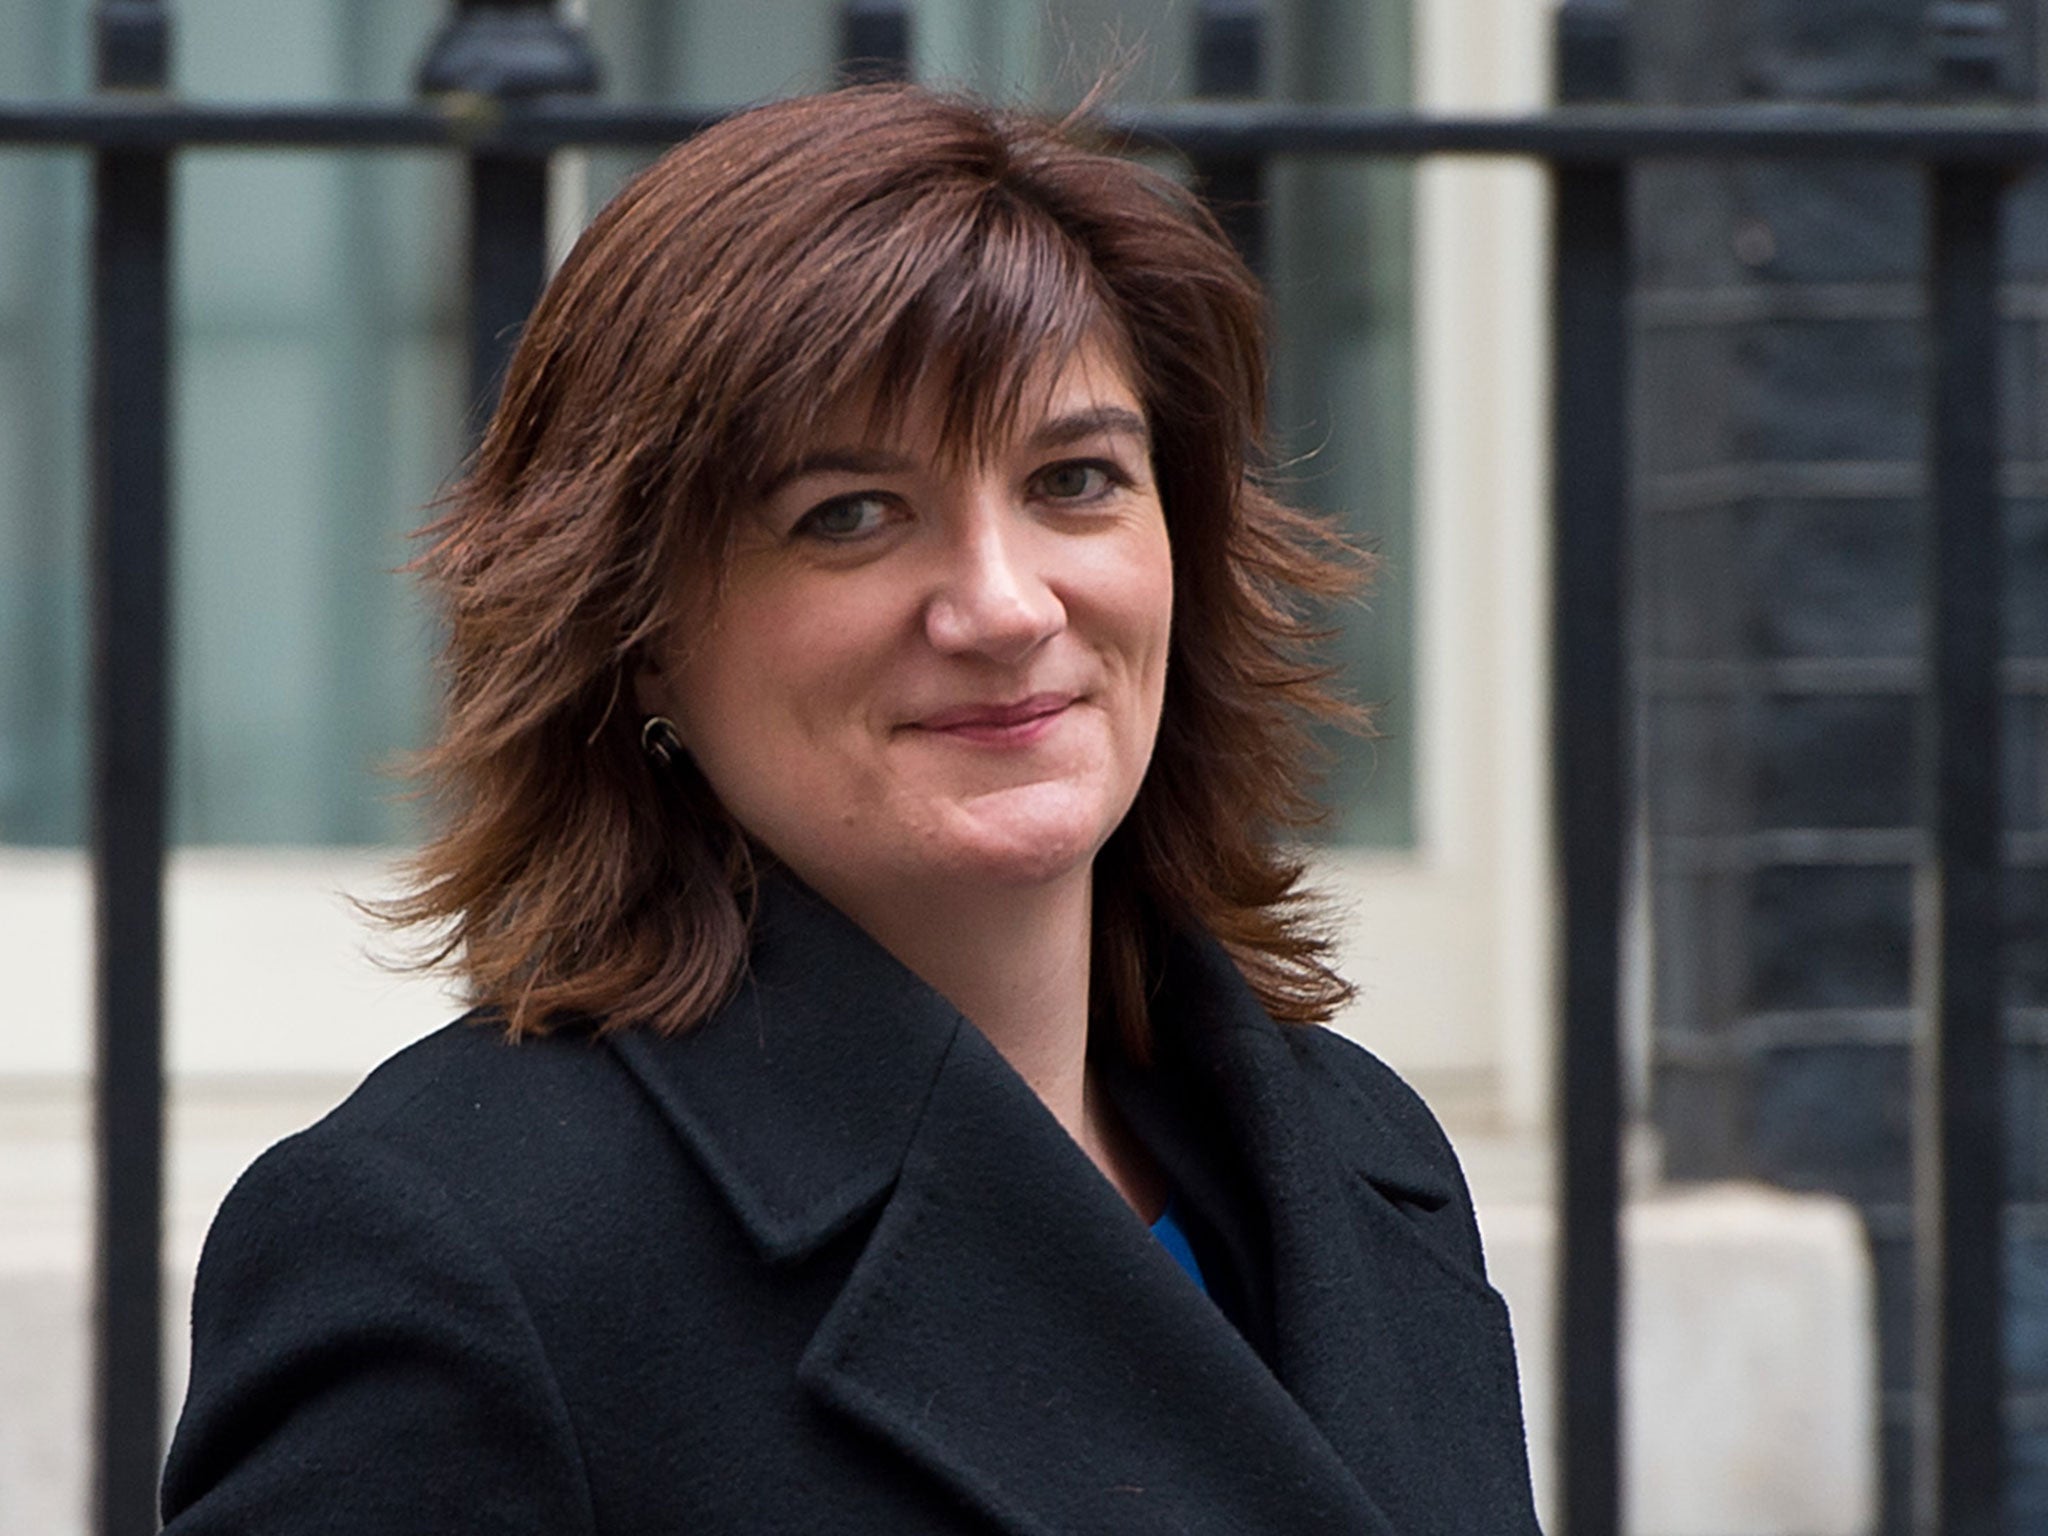 Nicky Morgan is the Conservative MP for Loughborough